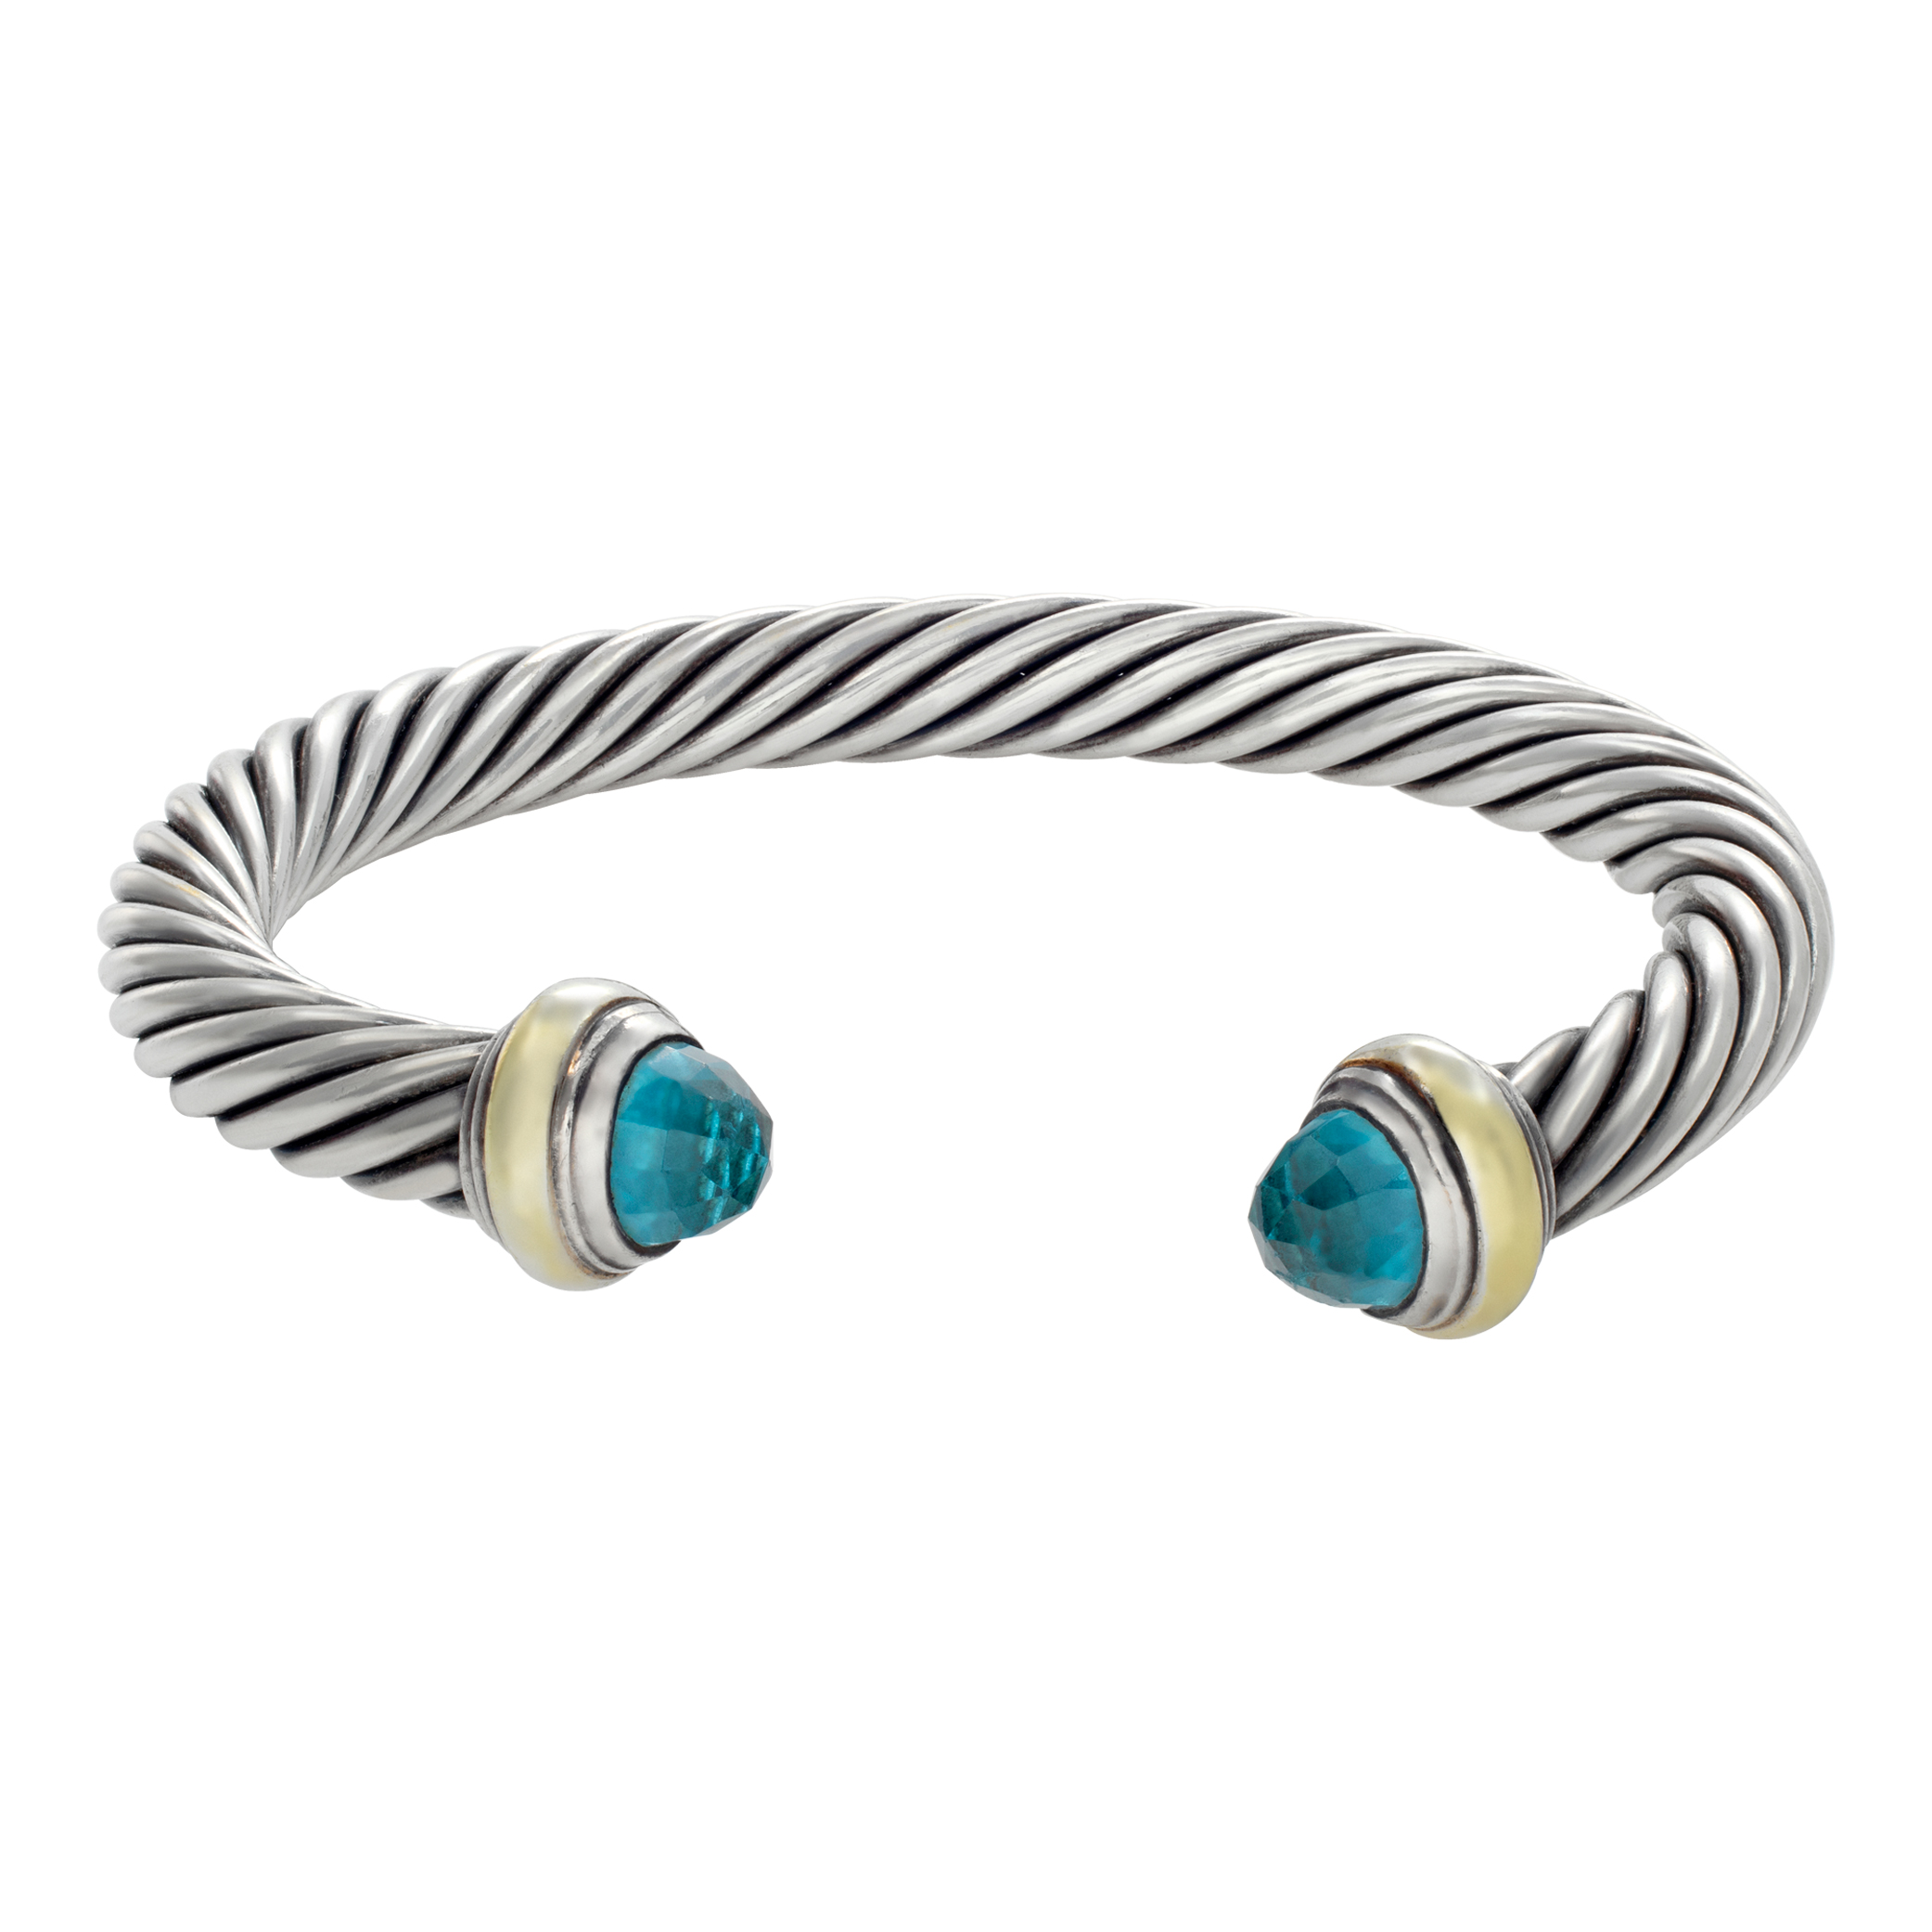 David Yurman Cable bracelet in sterling silver with blue topaz accents